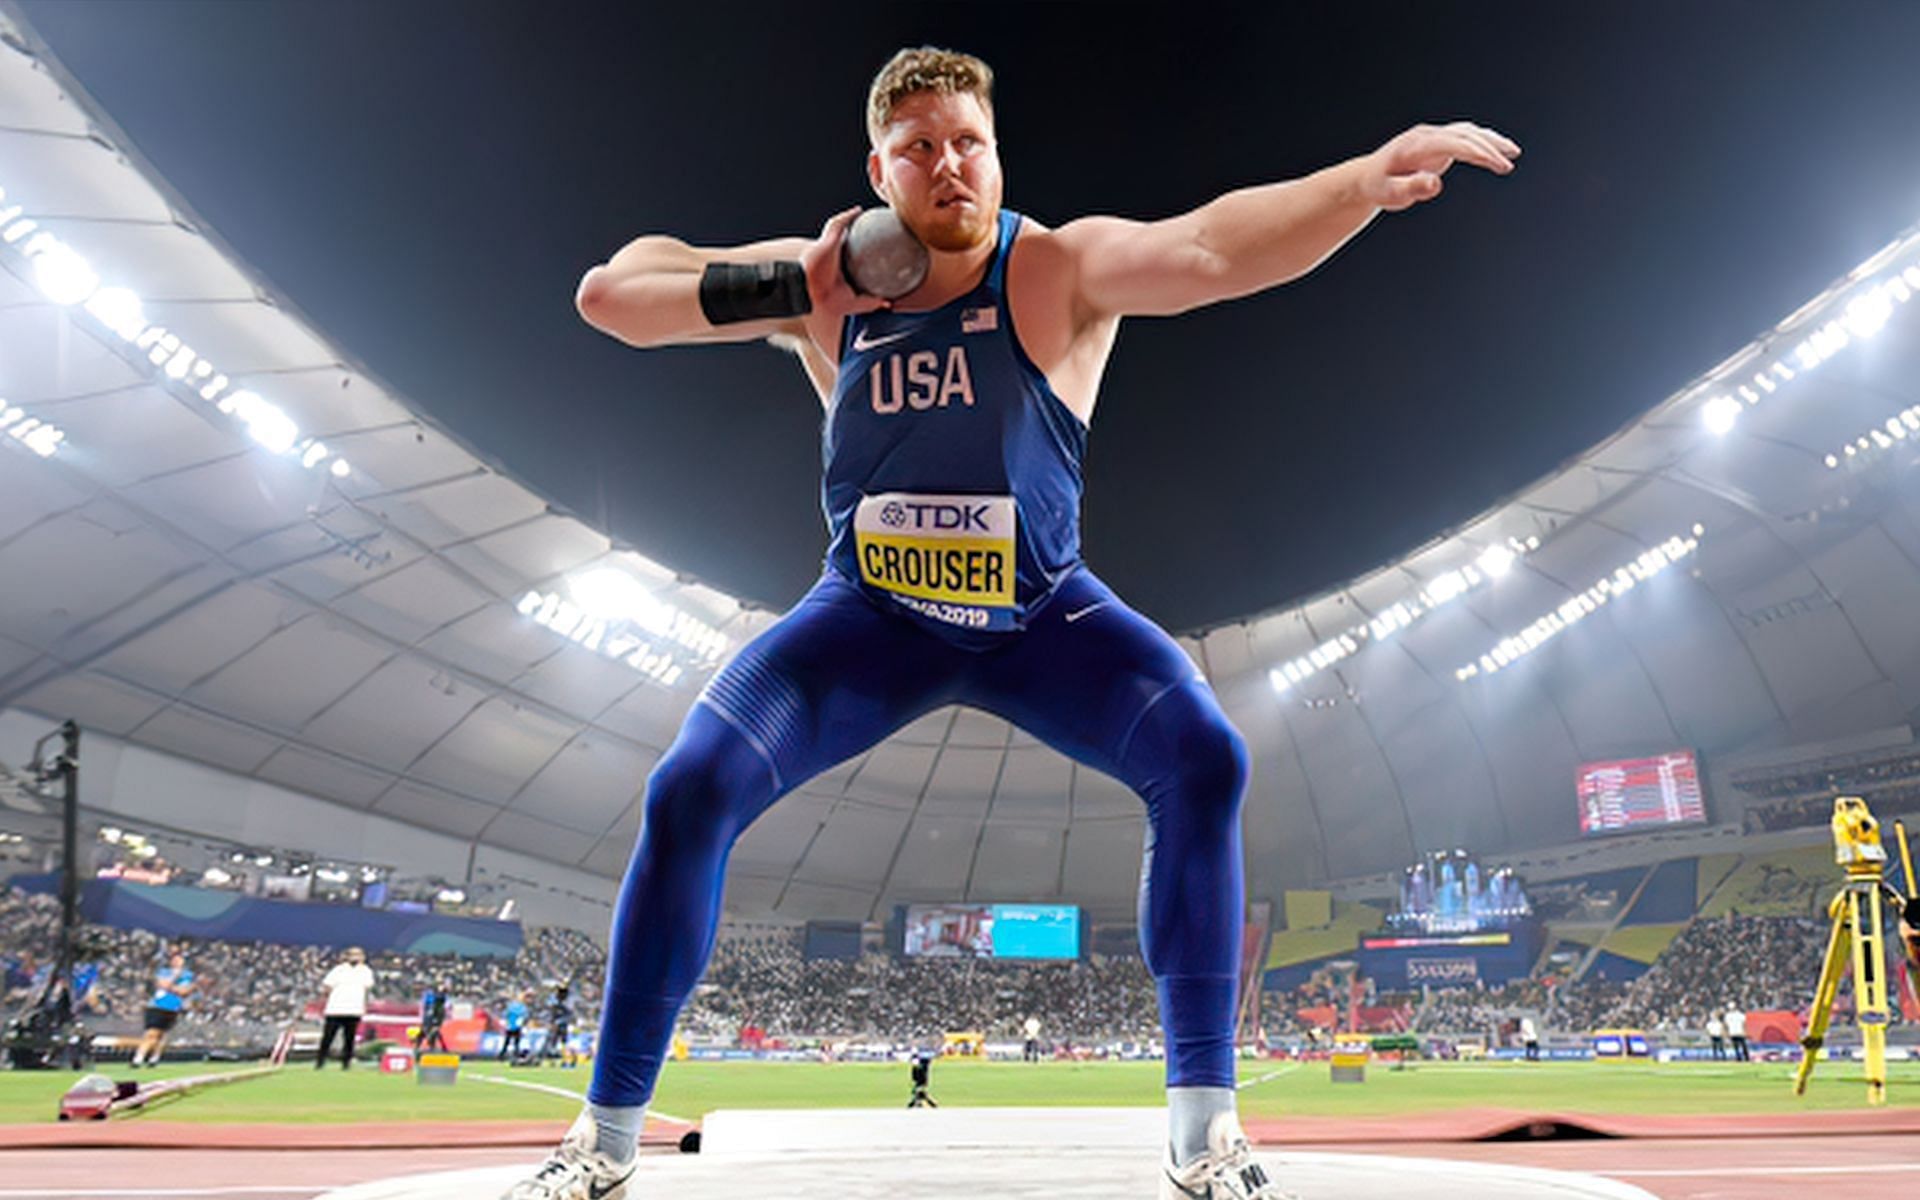 Ryan Crouser at the World Athletics Championships 2019 (Image via Getty Images)